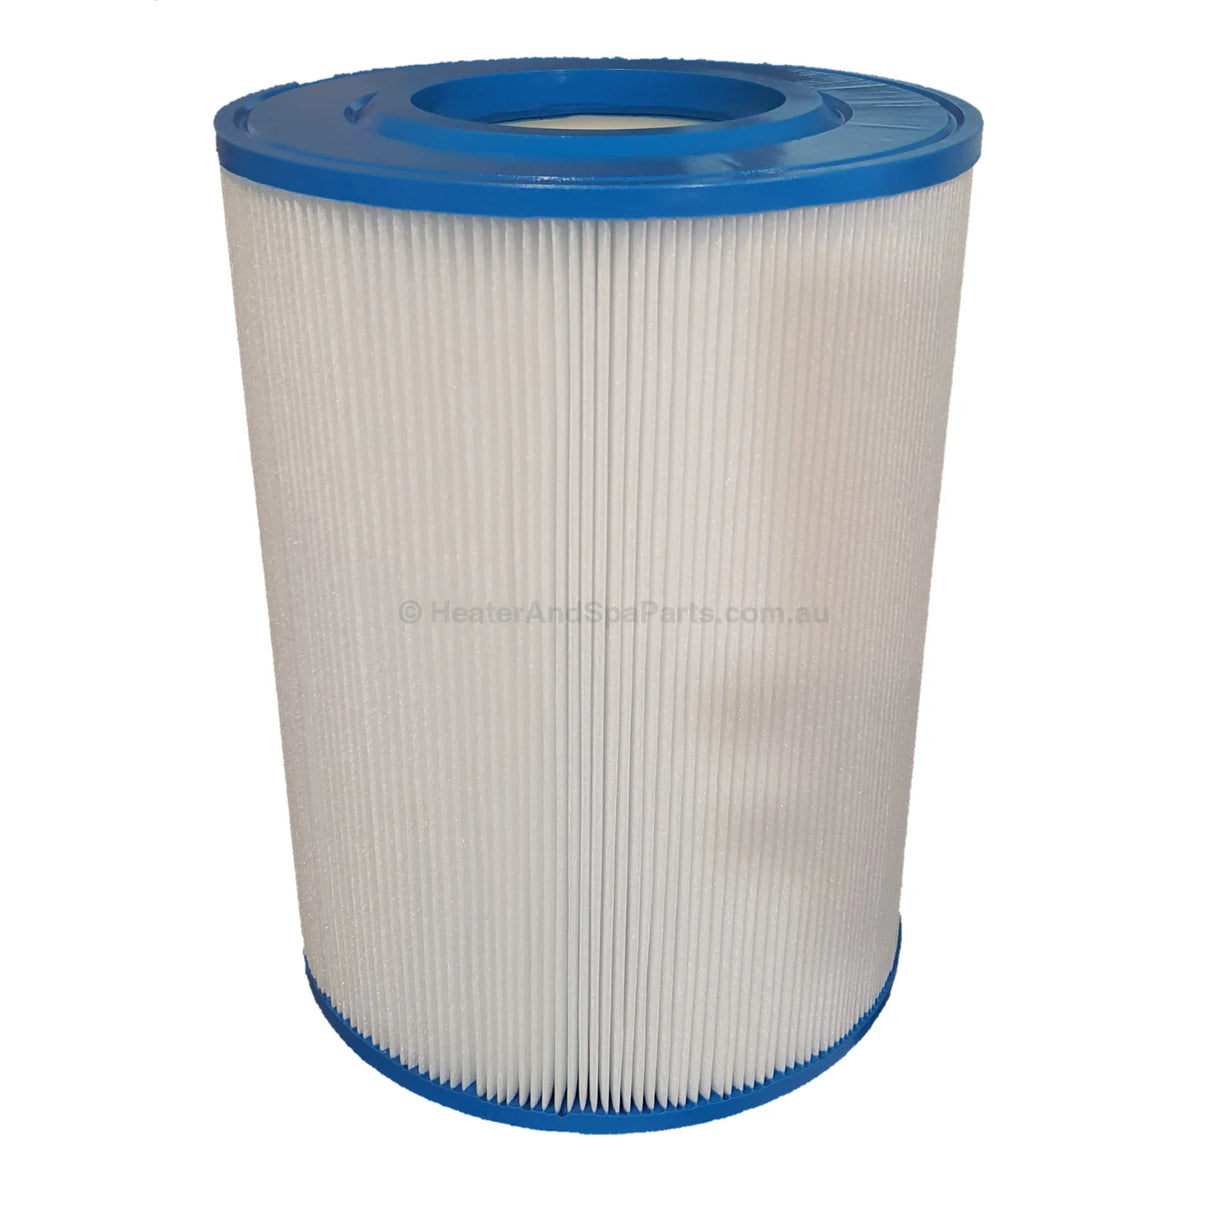 SQ S3000 50sqft Davey/Questa - Replacement Cartridge Filter - Heater and Spa Parts